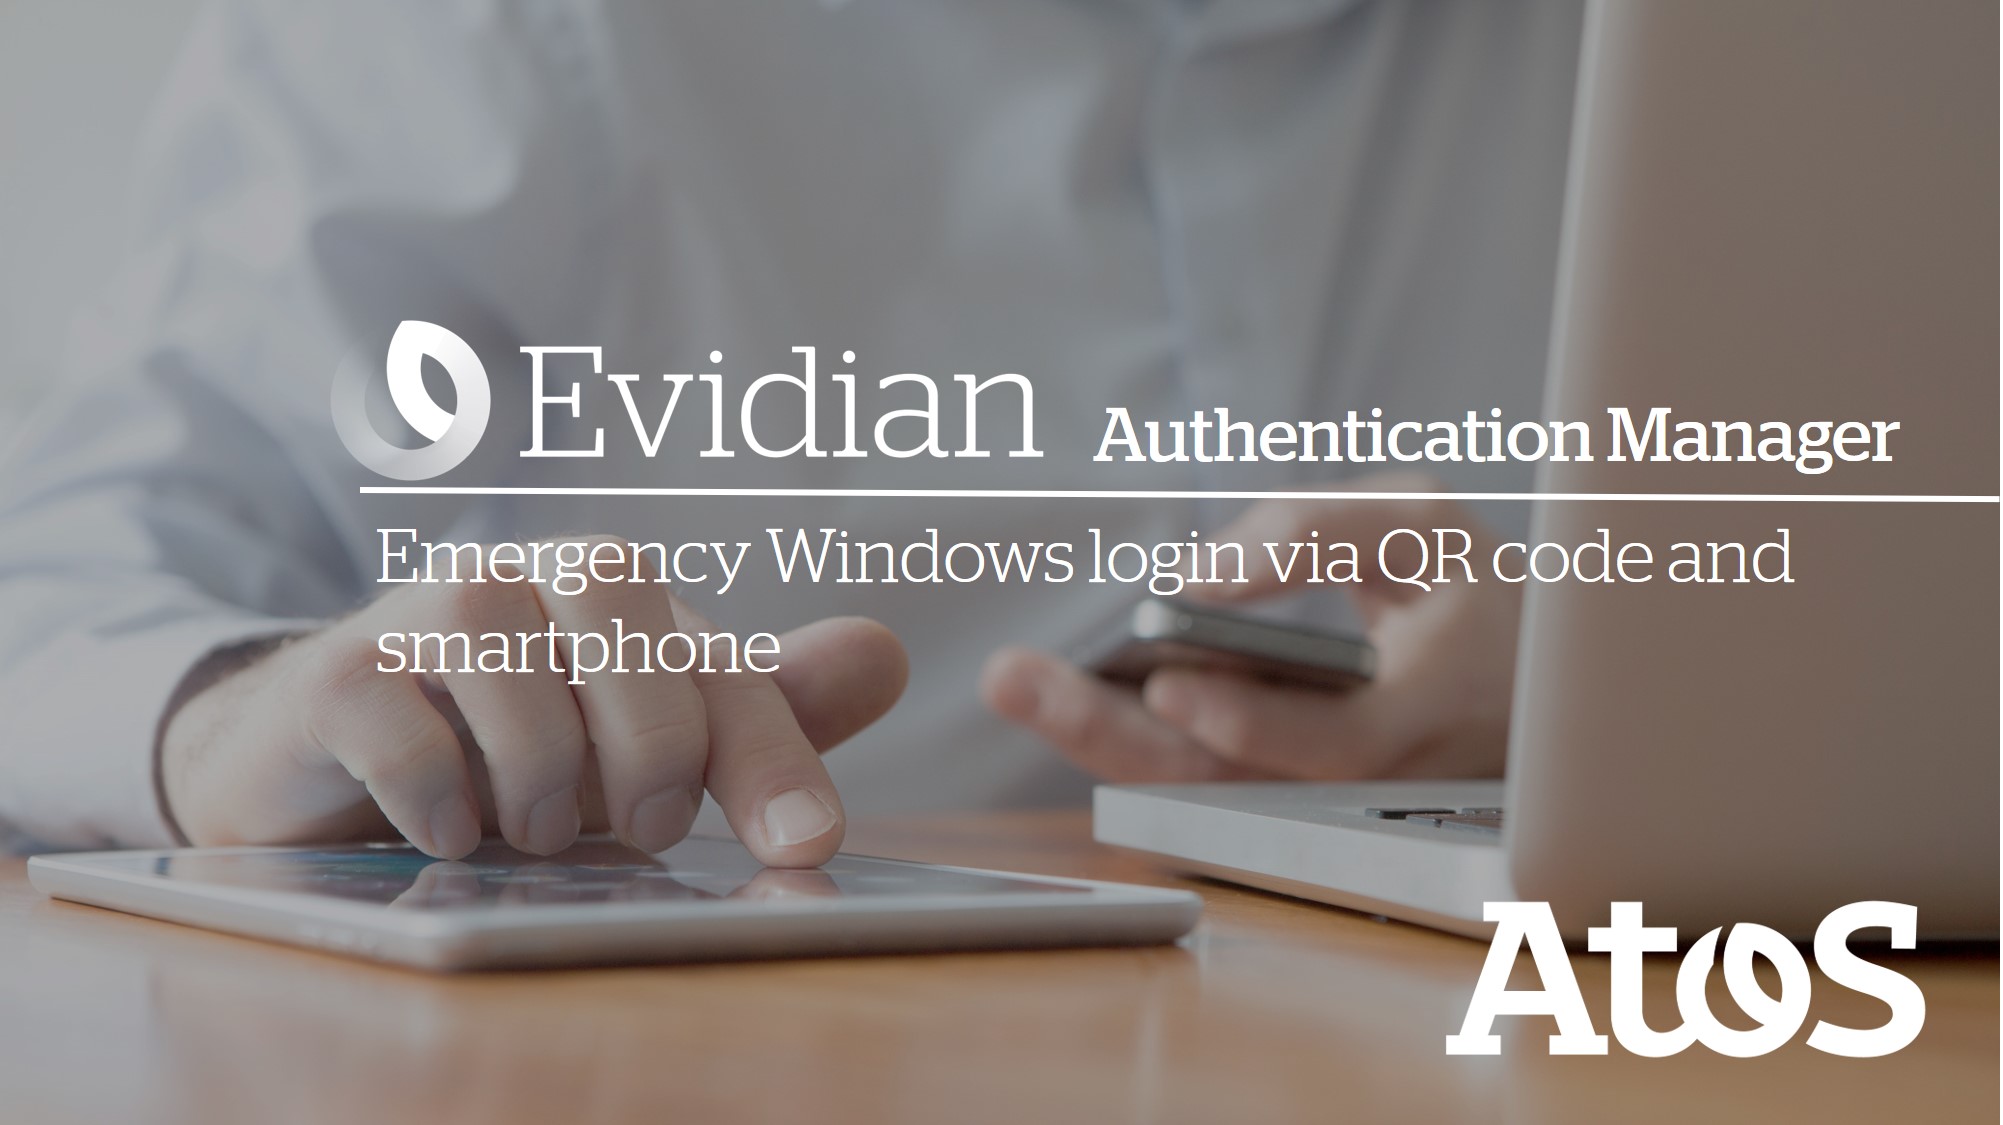 Push authentication using Evidian QRentry application